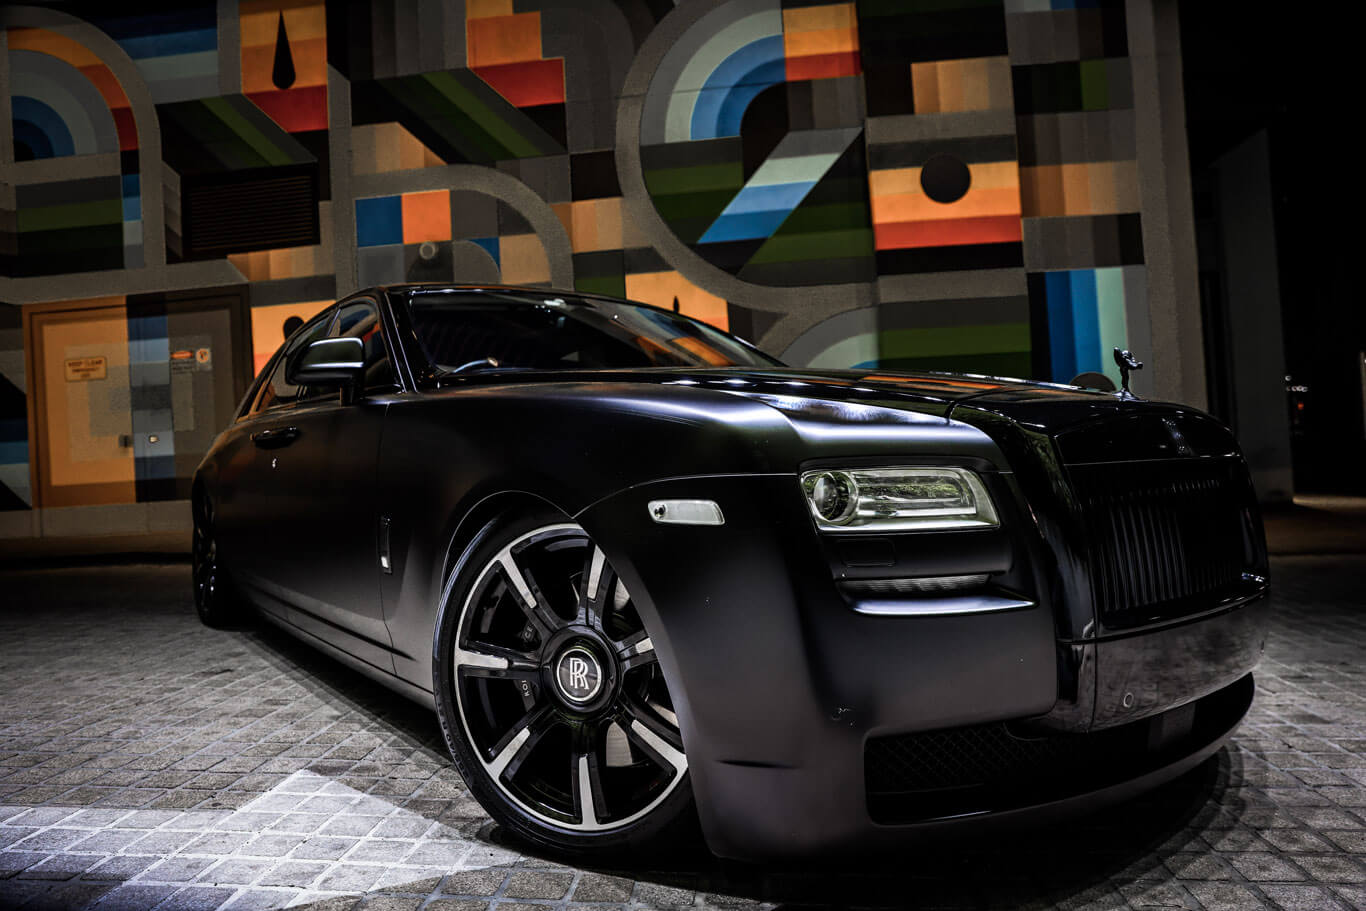 And now for the allelectric RollsRoyce Spectre all 800kplus of it